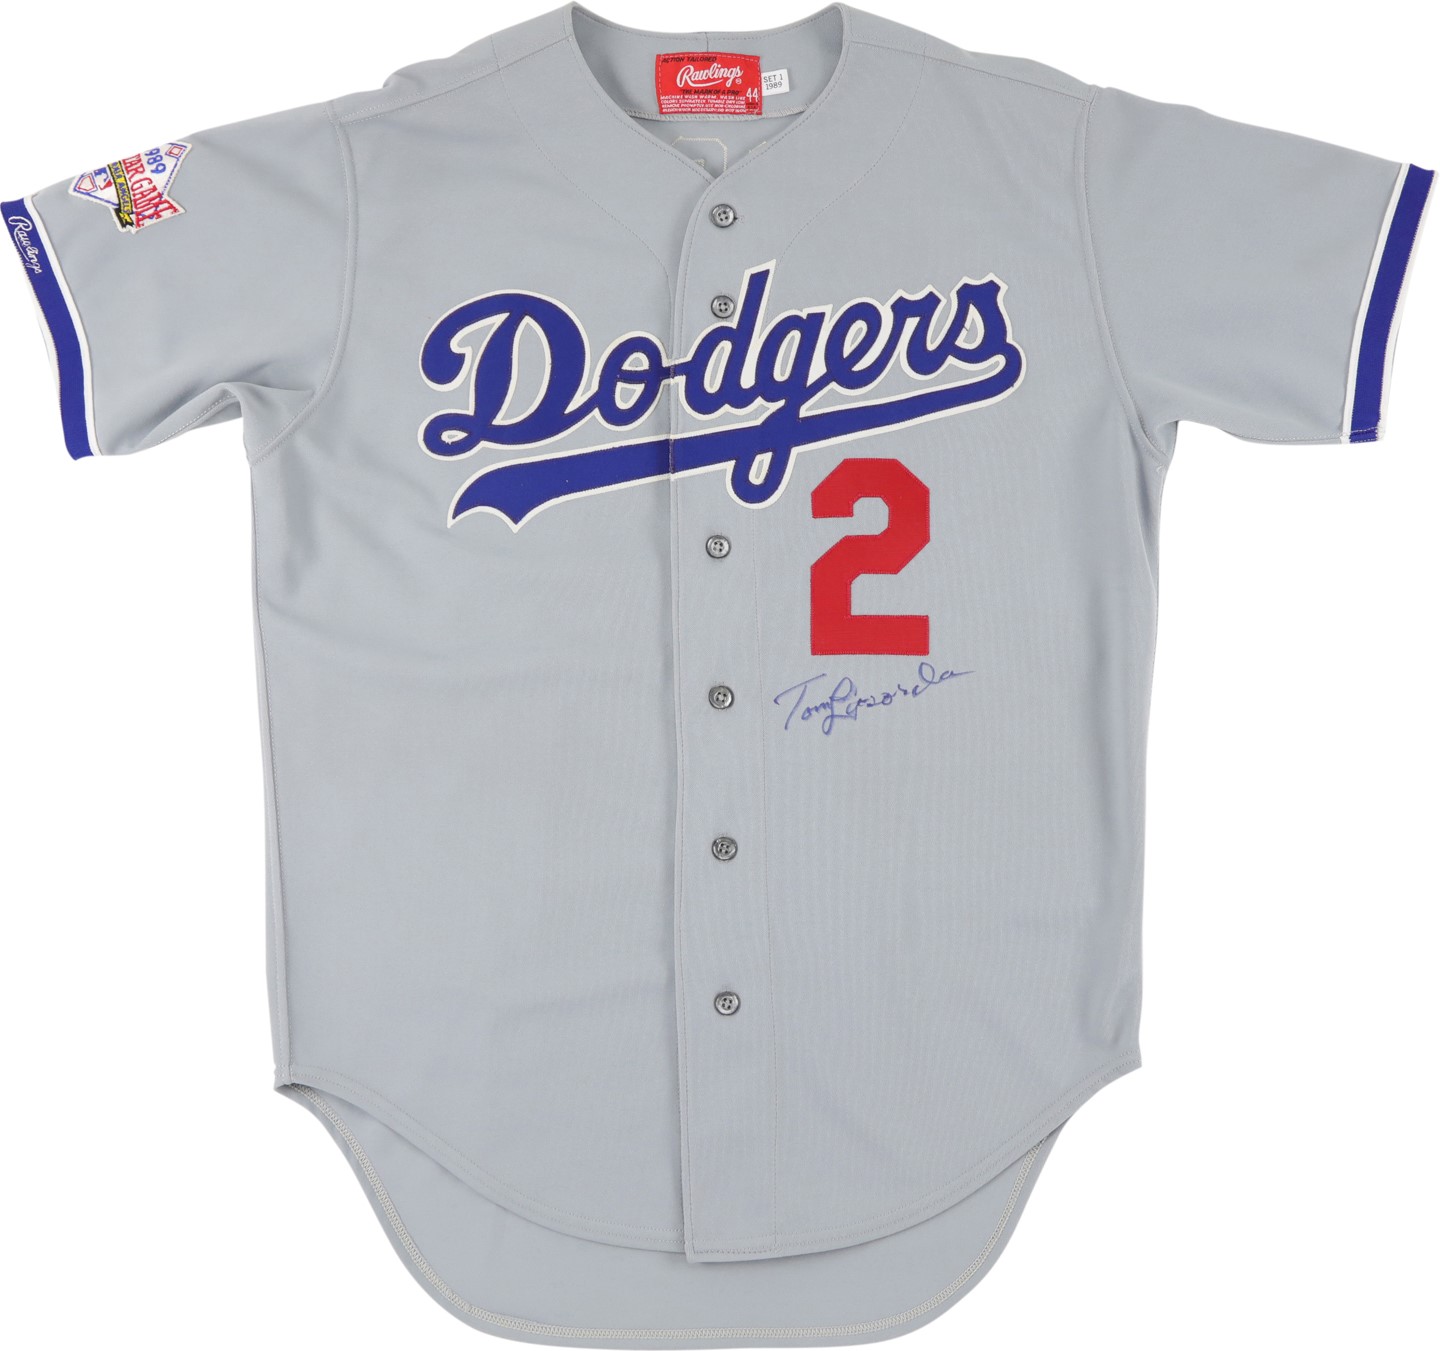 Baseball Equipment - 1989 Tommy Lasorda Los Angeles Dodgers All Star Game Worn Jersey